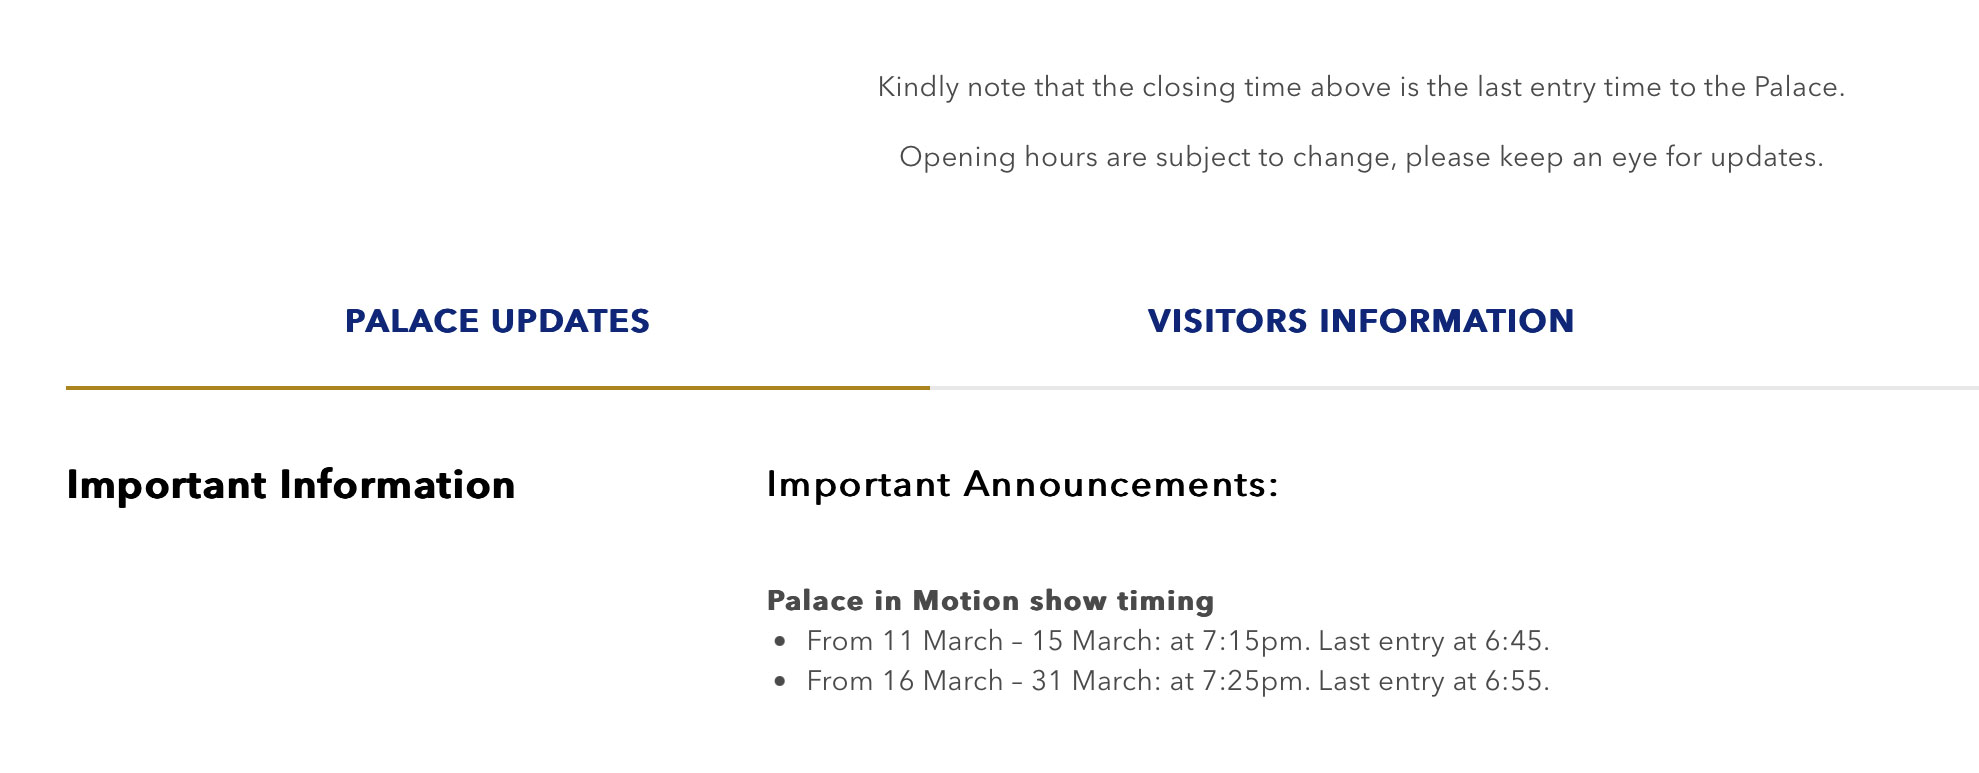 An example of where to find the opening times on their website.